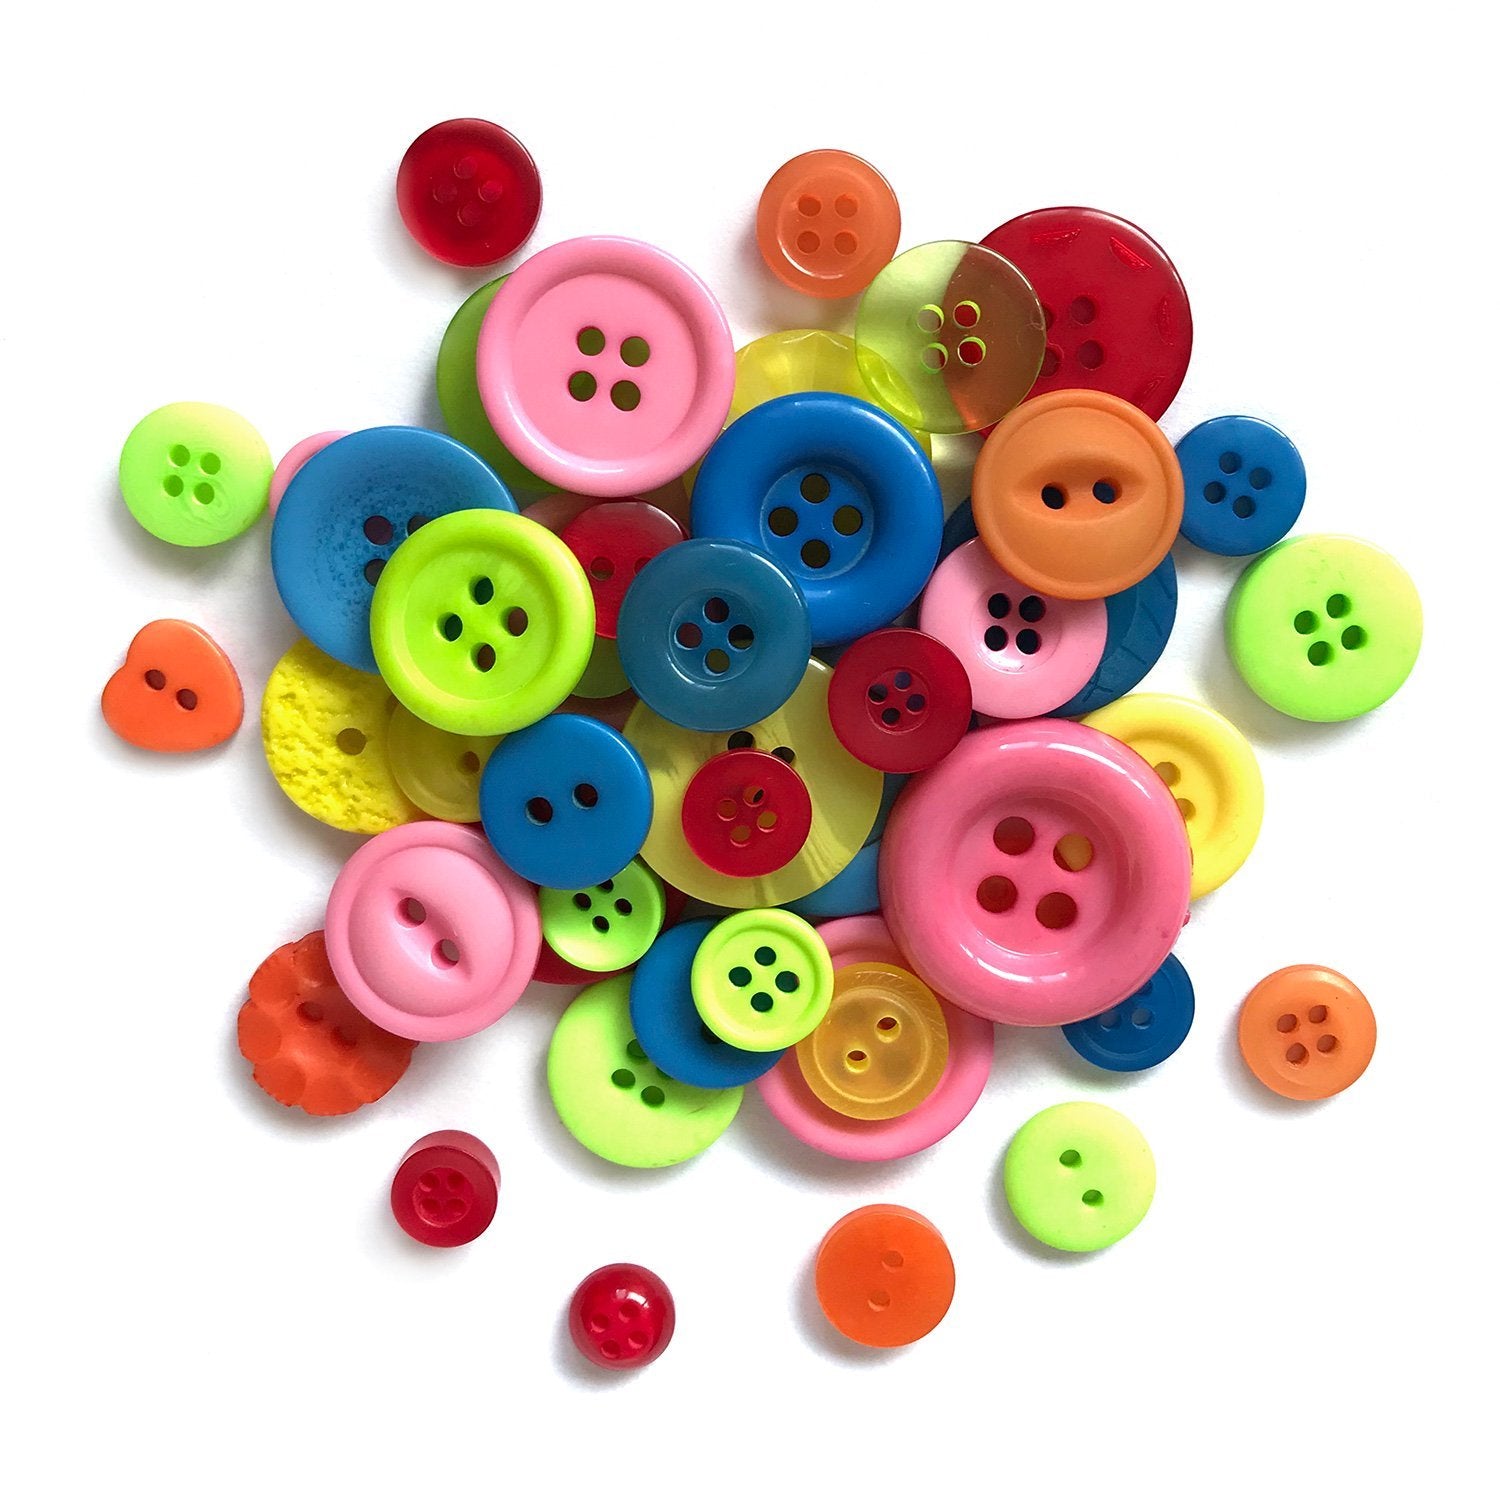 DISCONTINUED - 100 or 200 Bright rainbow round buttons round assorted mix  crafts plastic assorted buttons bright rainbow mash round GROUP A